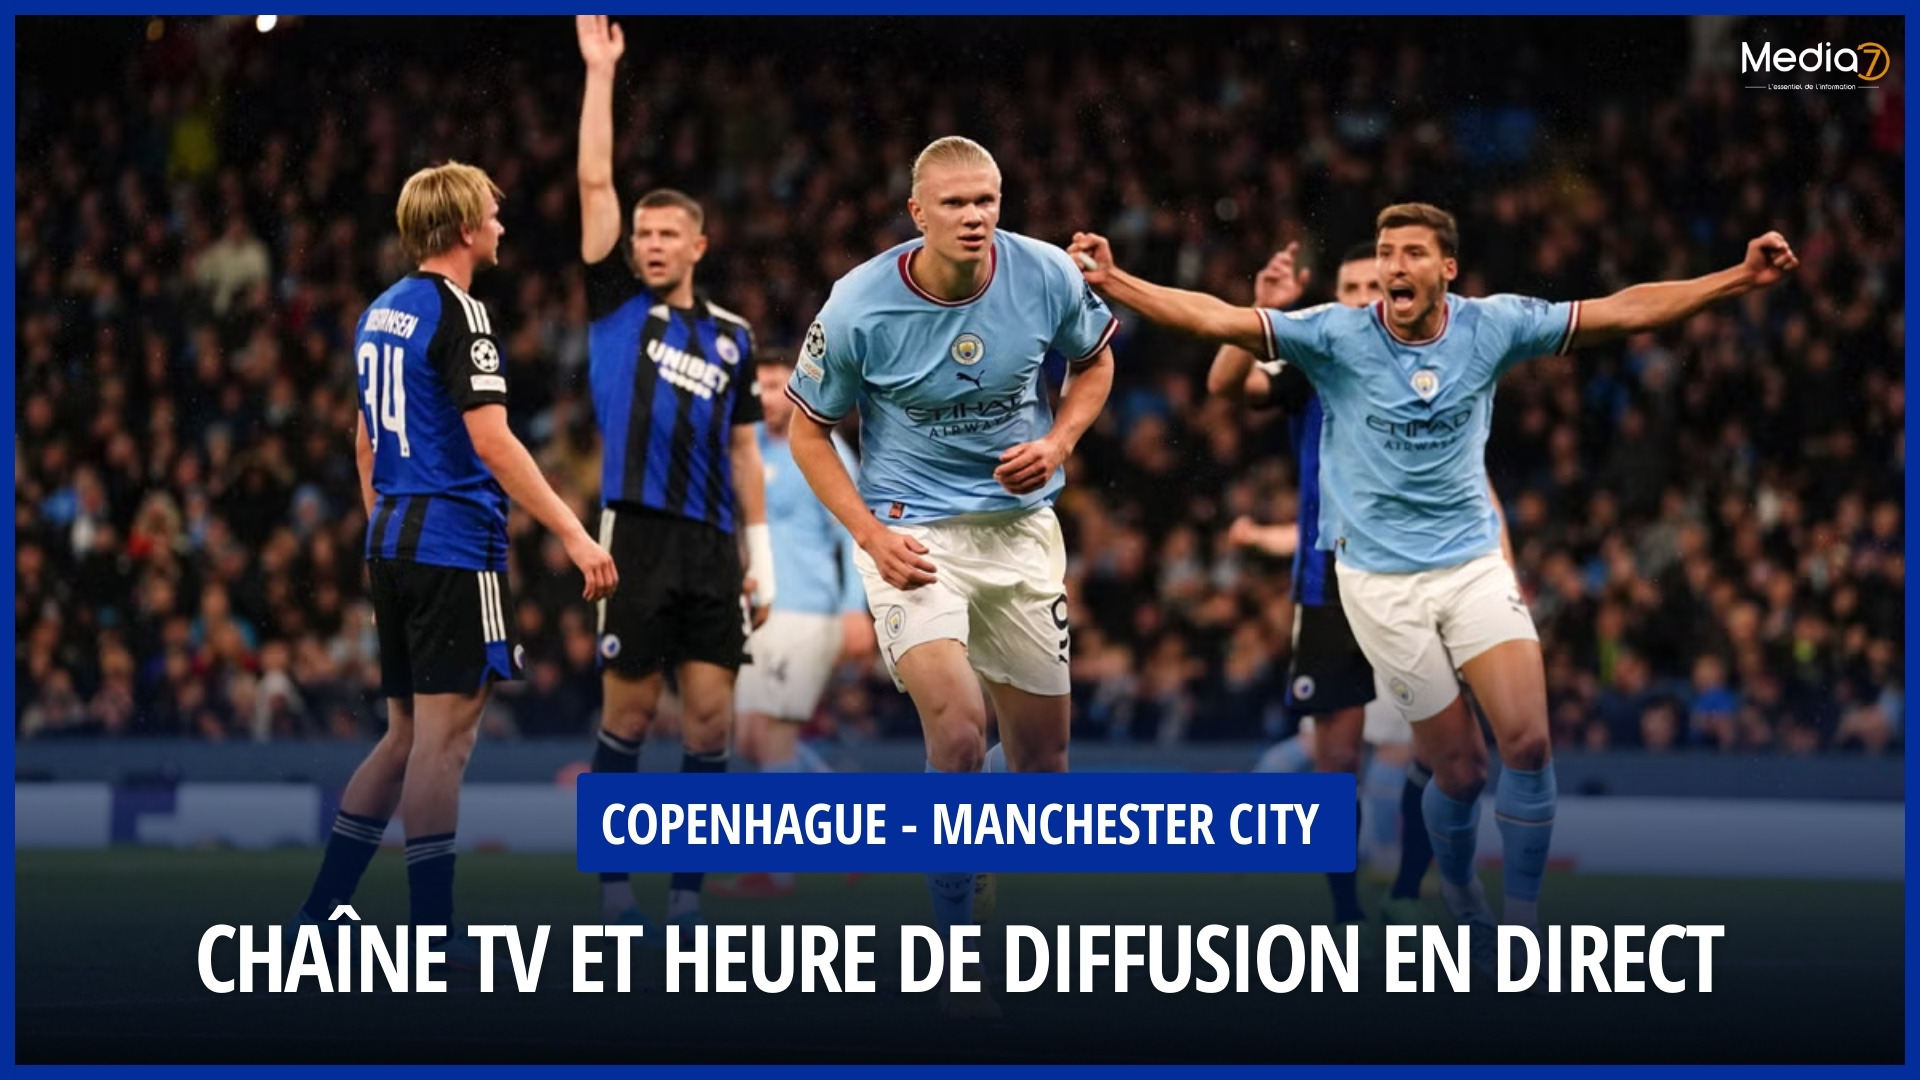 Match Copenhagen - Manchester City Live: TV Channel and Broadcast Time - Media7